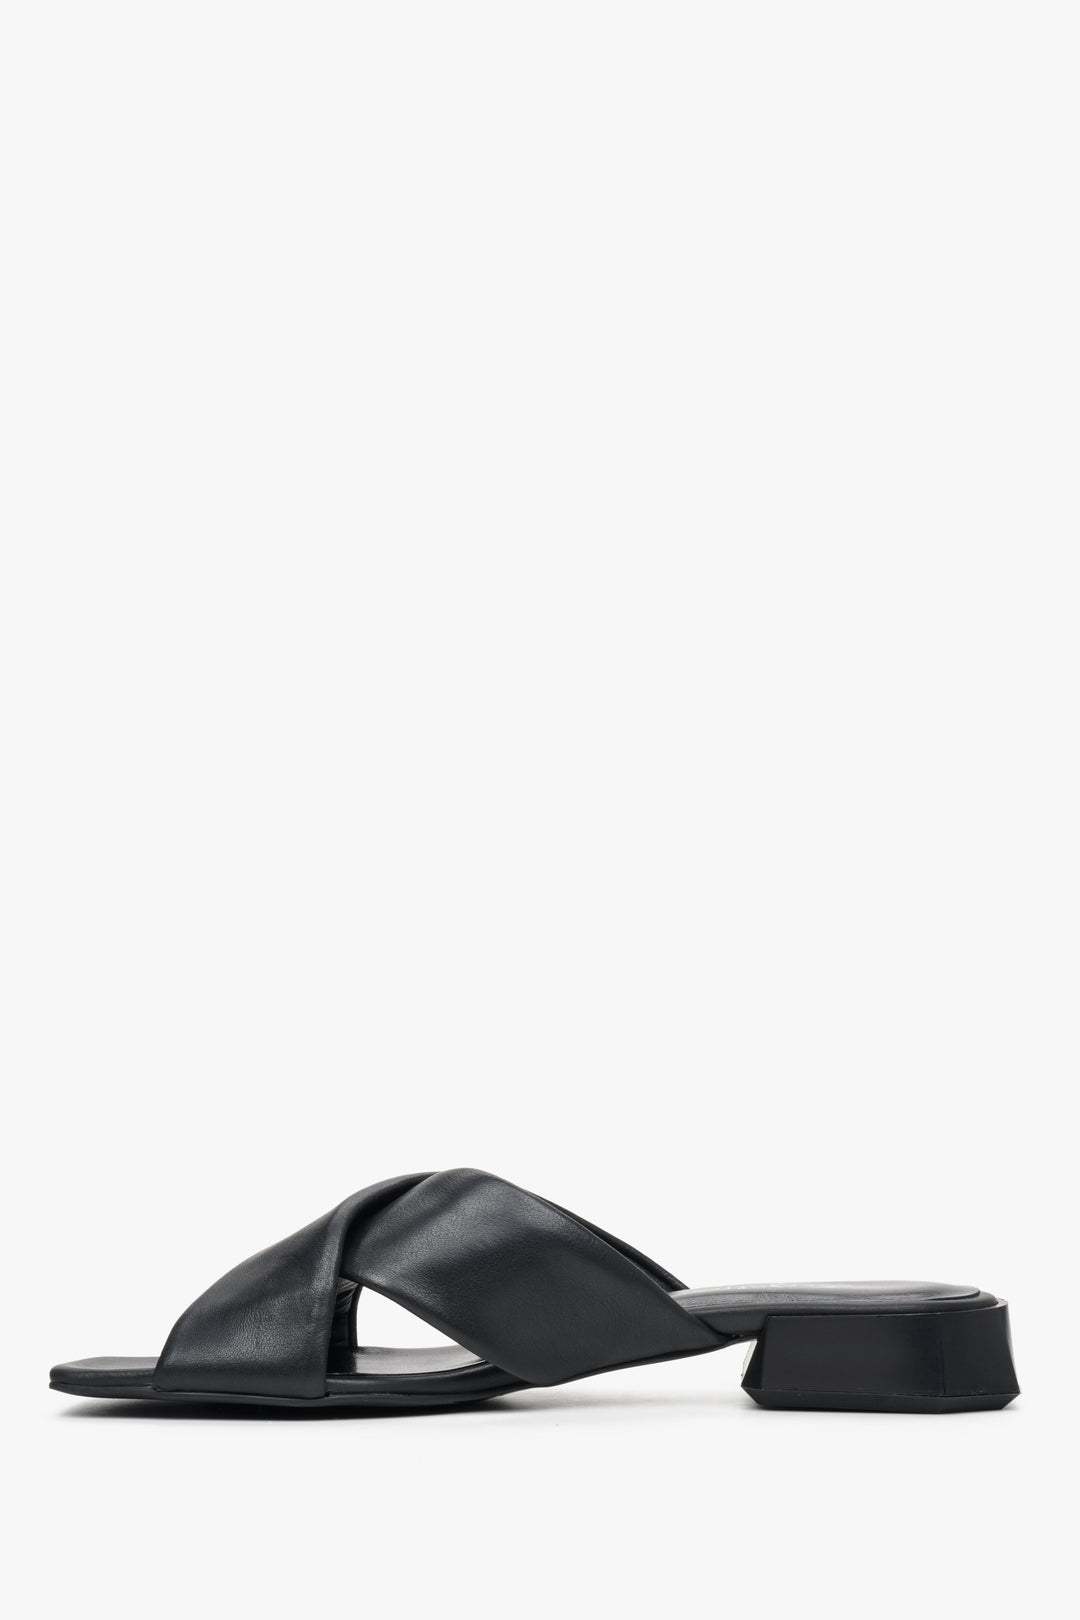 Women's cross-strap mules in black of Estro brand made of natural, Italian leather.